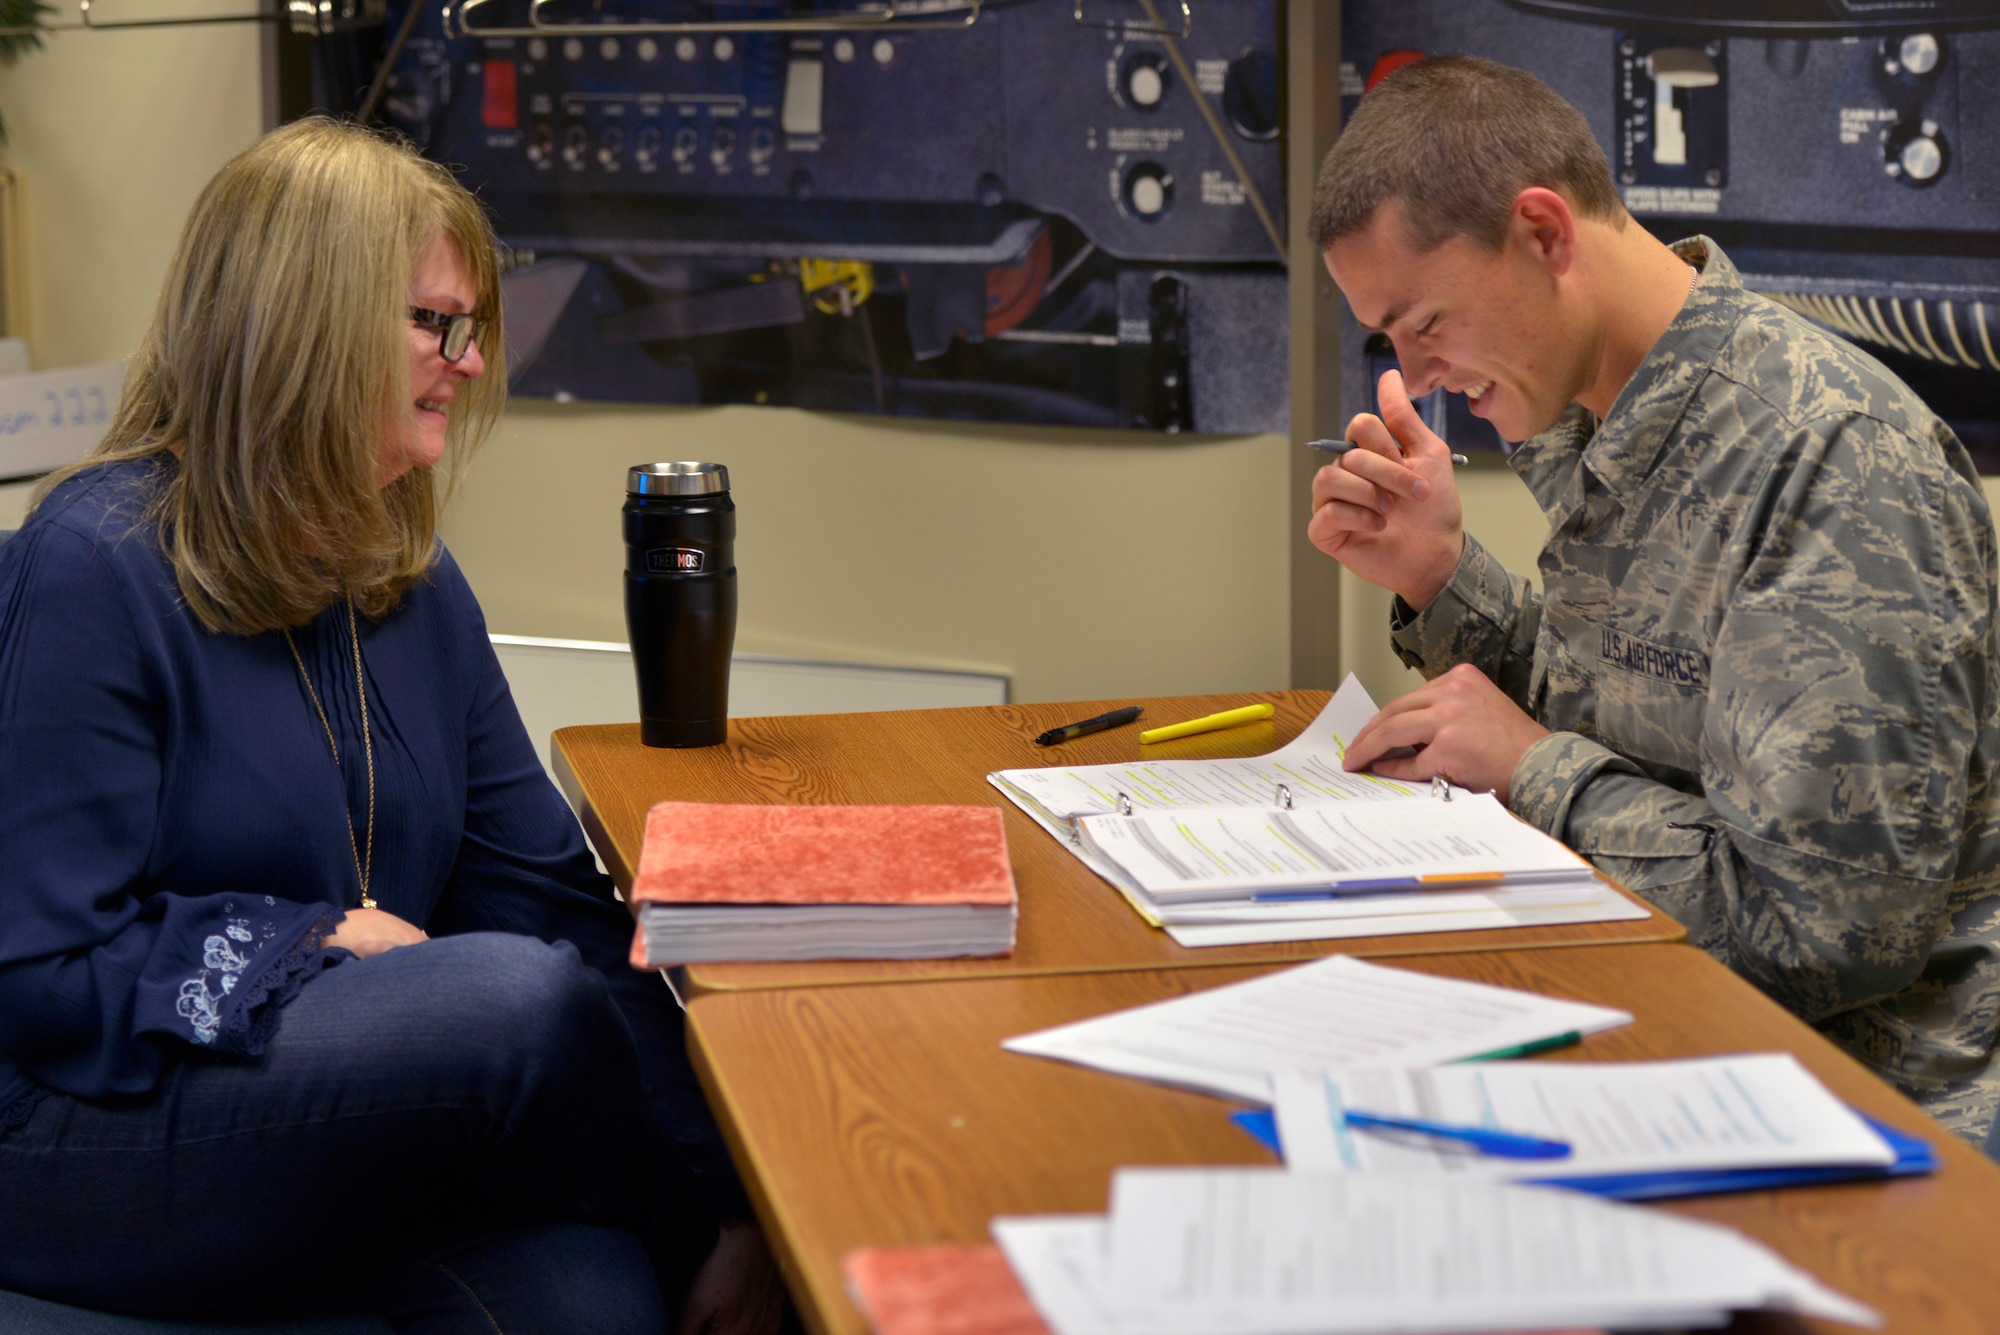 Katherine Chowdhary, 334th Training Squadron instructor, assists Airman Andrew Ebert, 334th TRS air traffic control student, with an assignment at Keesler Air Force Base, Mississippi, Feb. 2, 2019. Chowdhary’s class is the first to incorporate an Active Learning Environment in the ATC course and throughout the course she ensures her students are given the opportunity to understand the course material fully. The 81st Training Group encourages all instructors to implement innovative techniques to better develop Mach-21 Airmen. (U.S. Air Force photo by Airman 1st Class Kimberly L. Mueller)